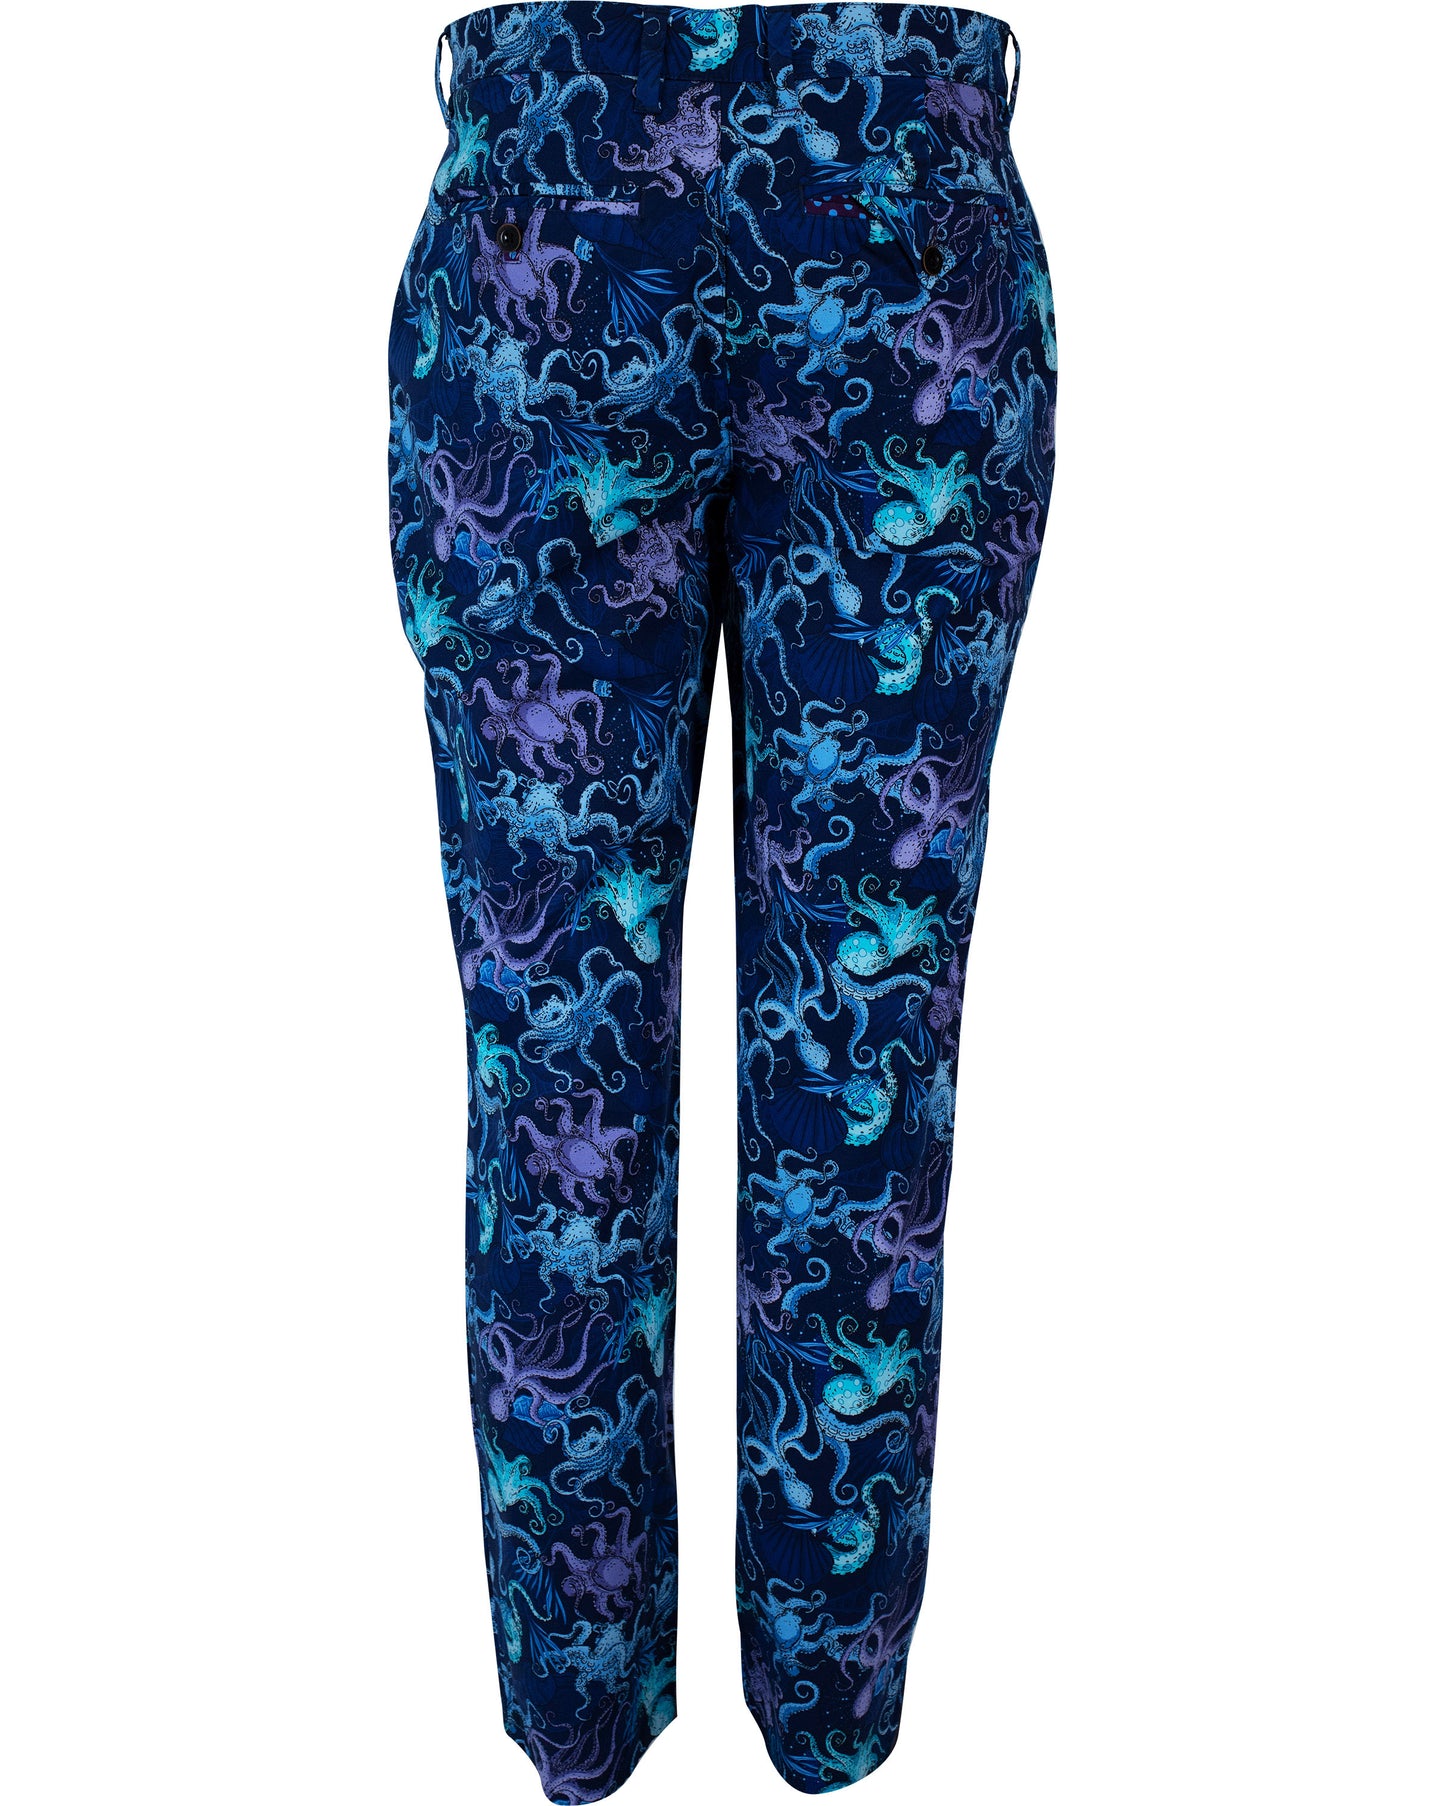 CHARLES OCTOPUS PARTY PANTS IN NAVY